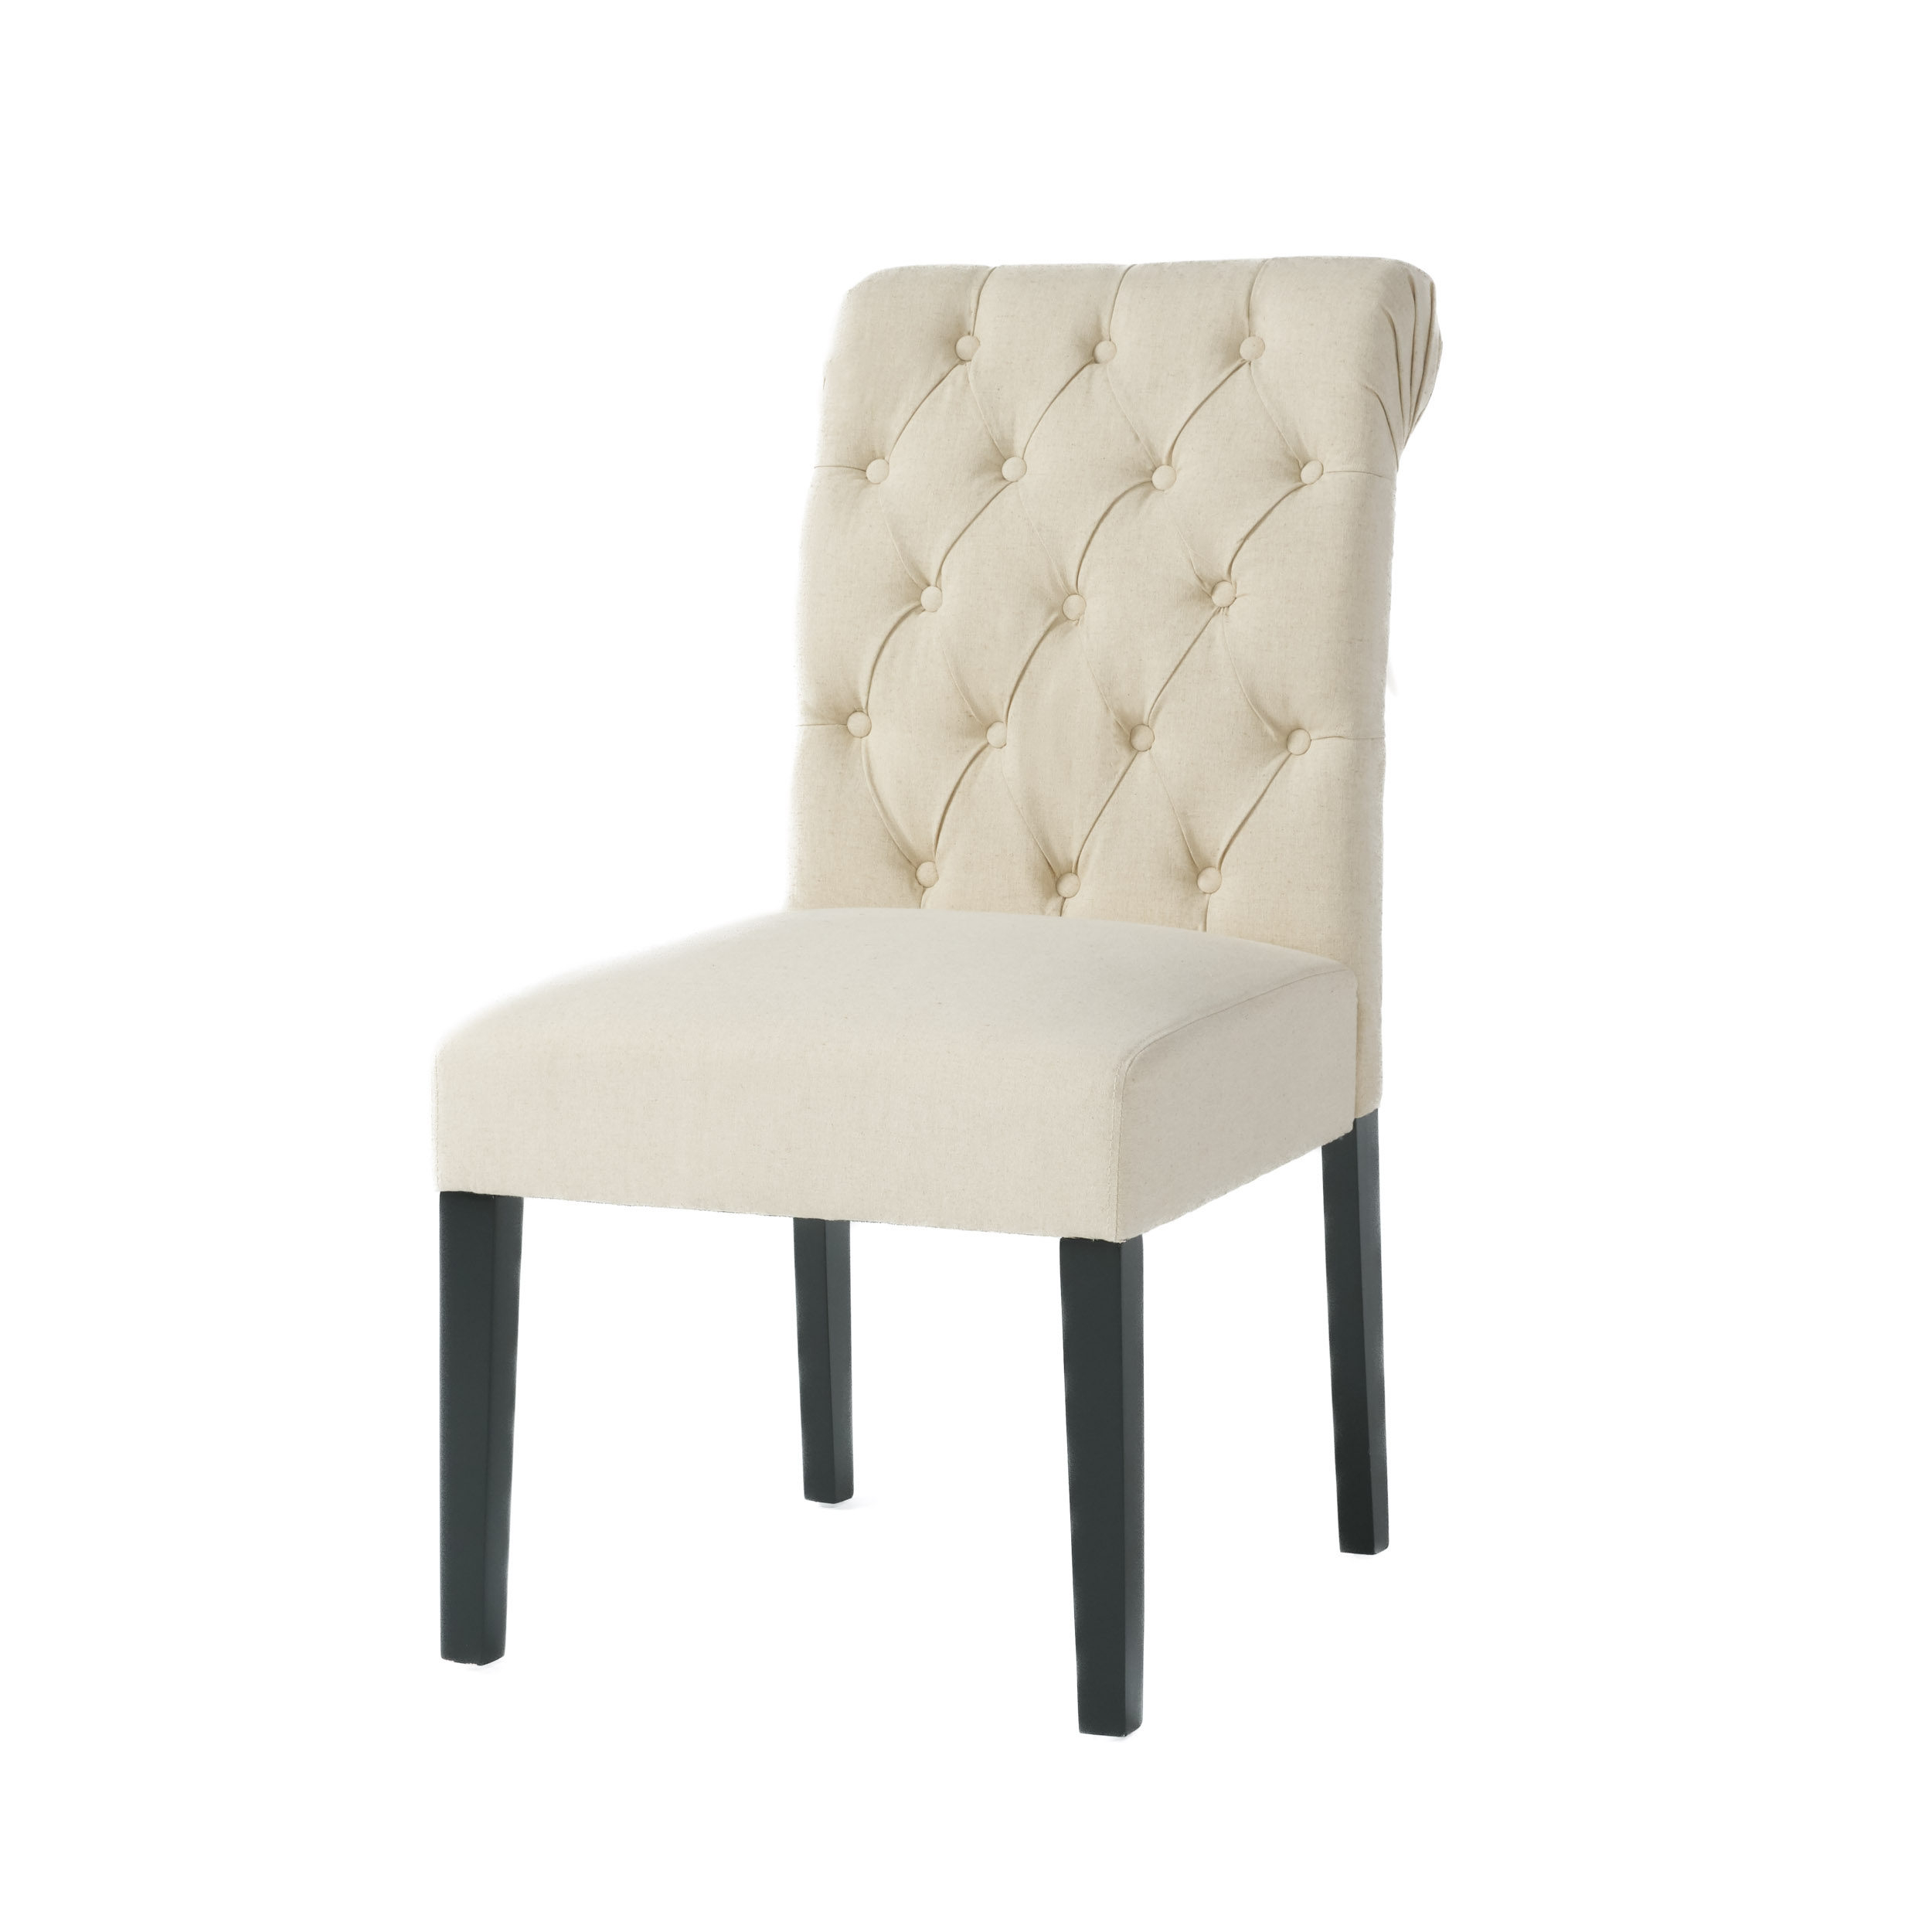 Elmerson Tufted Ivory Fabric Dining Chair (Set Of 2)